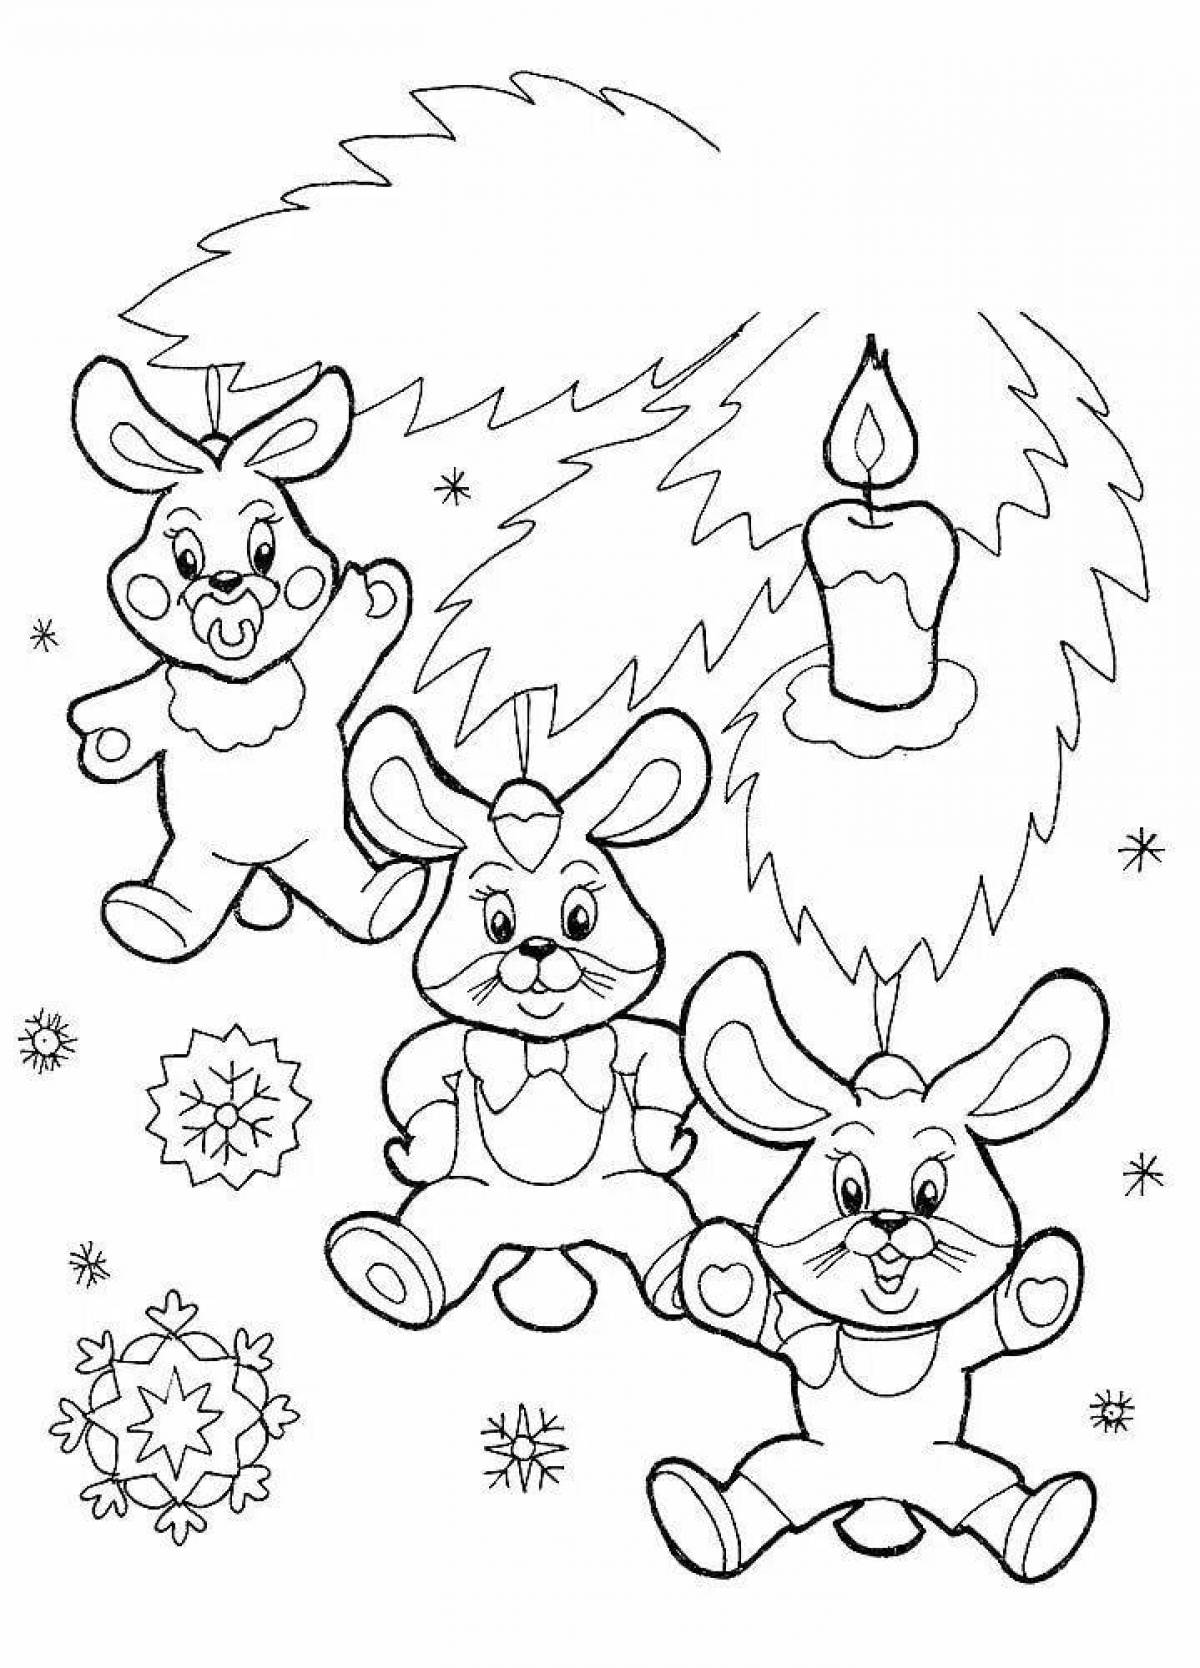 Stormy new year 2023 coloring book